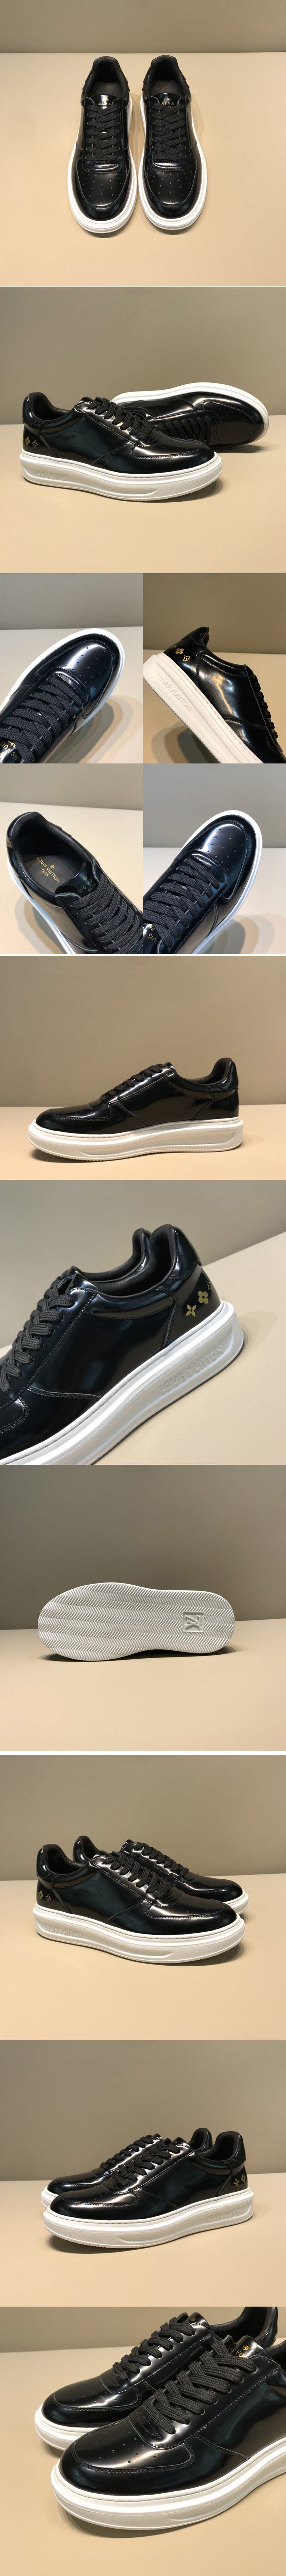 Replica Louis Vuitton 1A46OW LV Beverly Hills Sneaker in Black Glazed calf leather